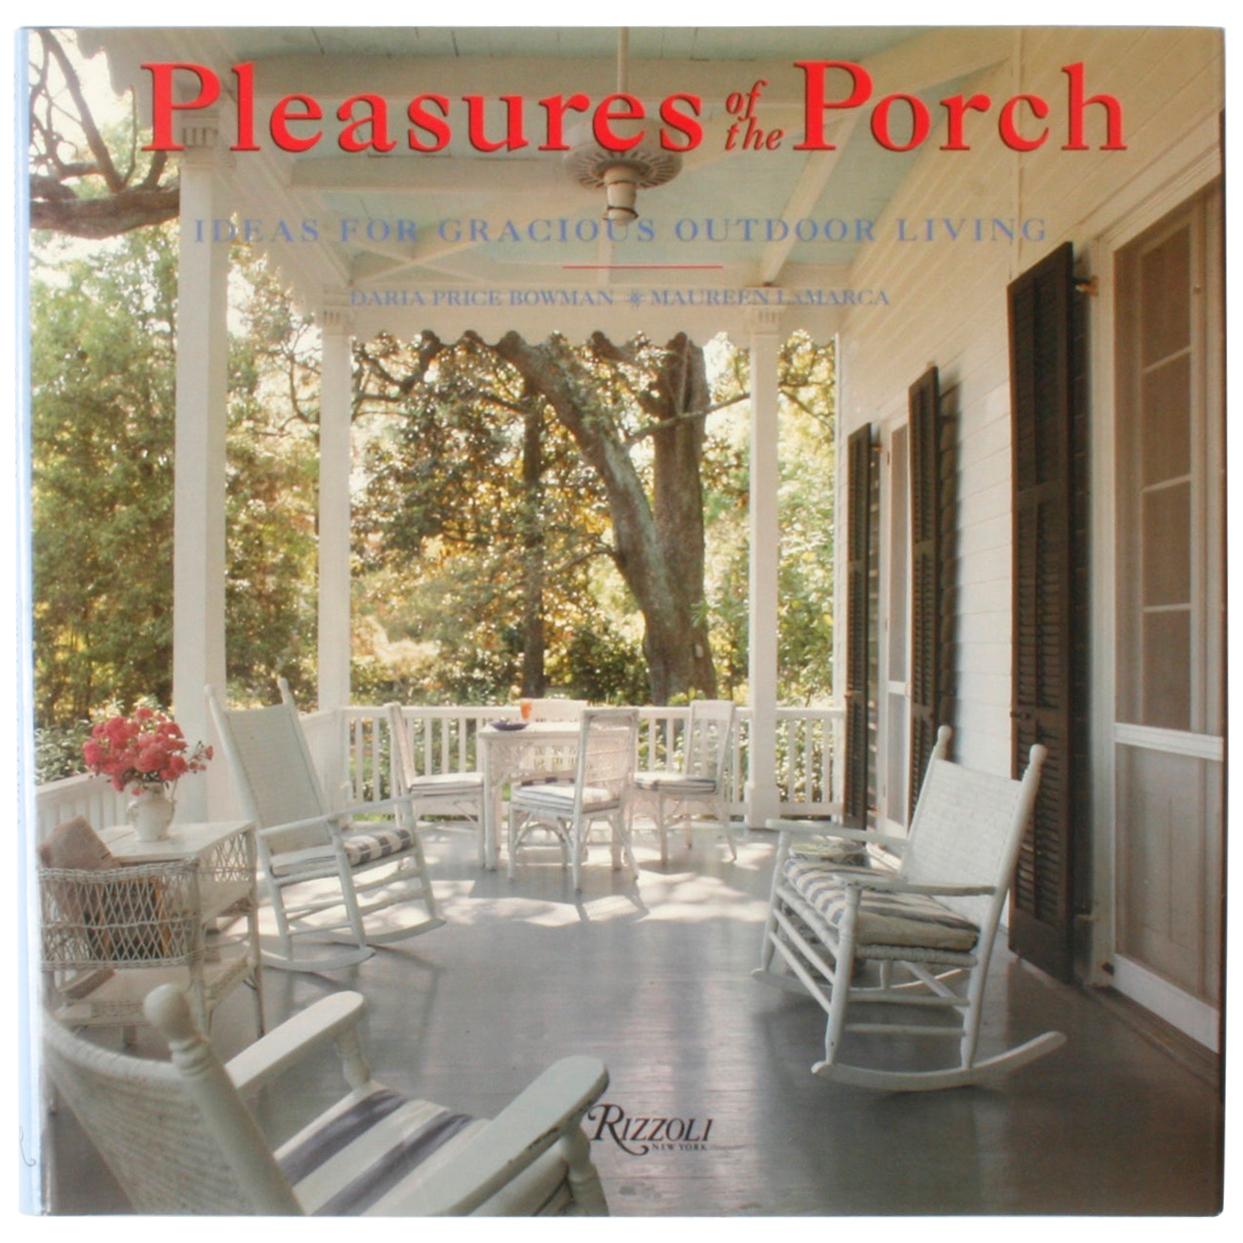 Pleasures of the Porch by Daria Price Bowman & Maureen LaMarca First Edition For Sale